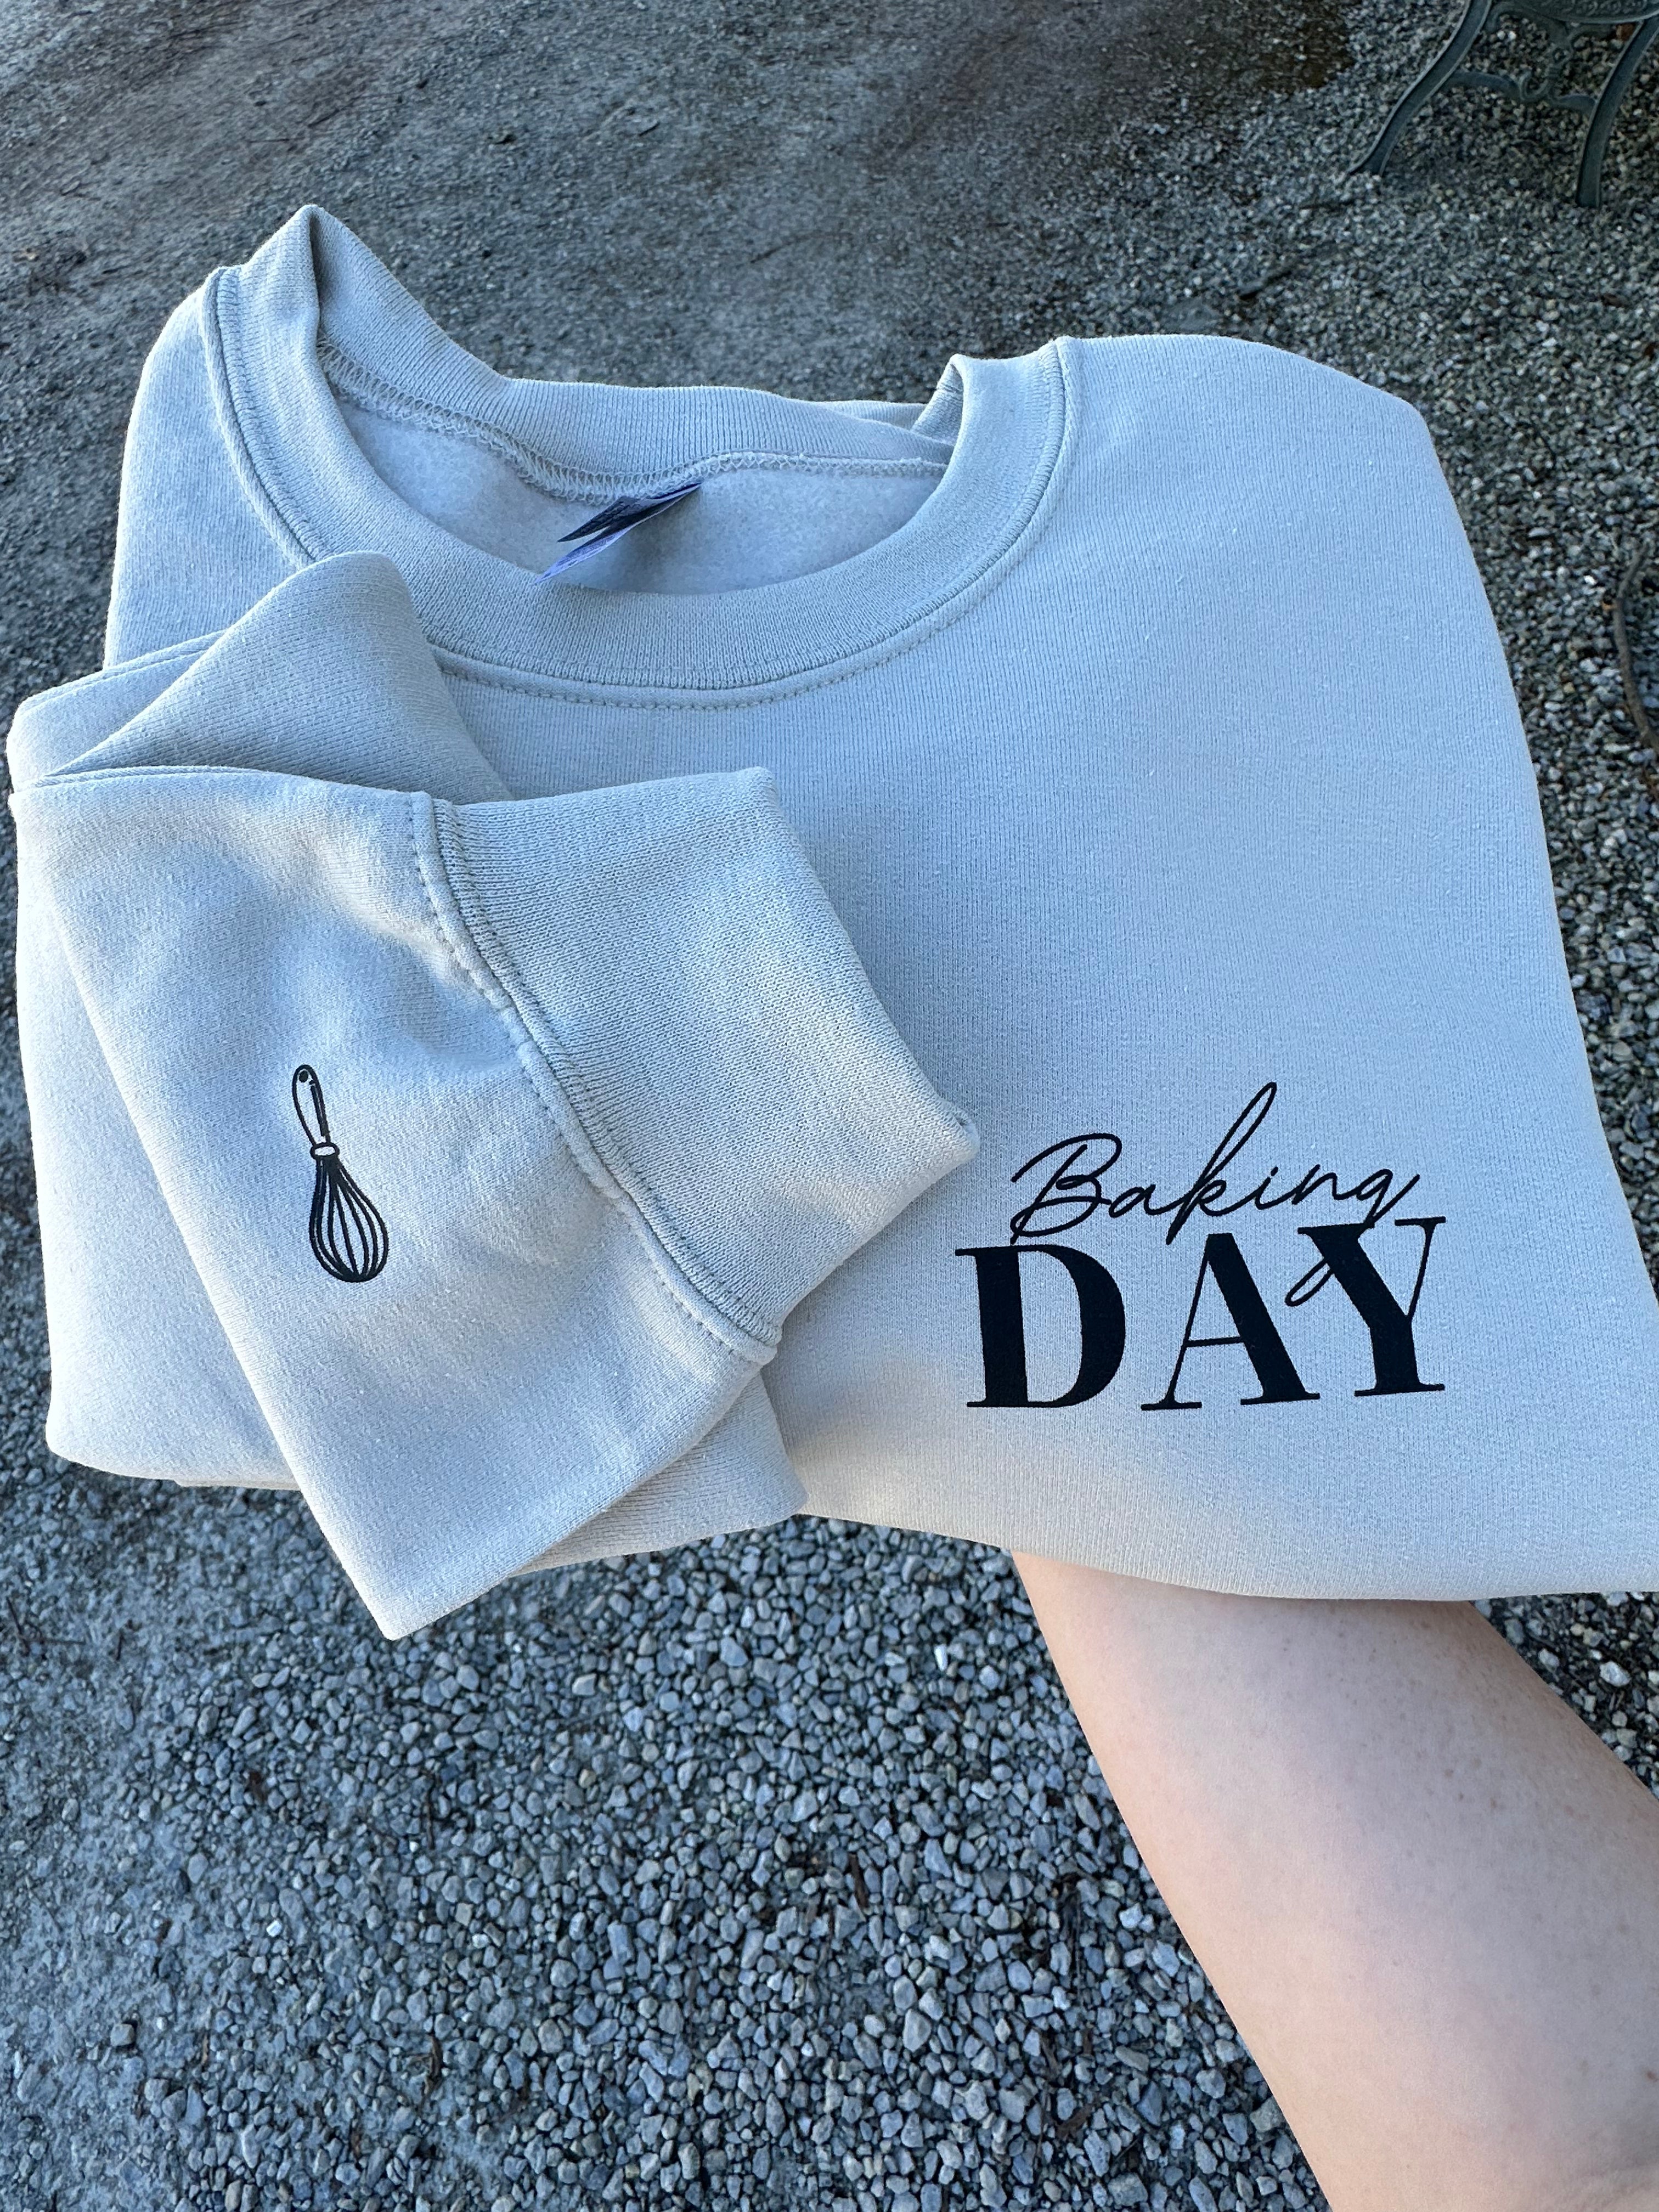 RESTOCK COMING SOON Baking Day crew neck (whisk wrist detail)